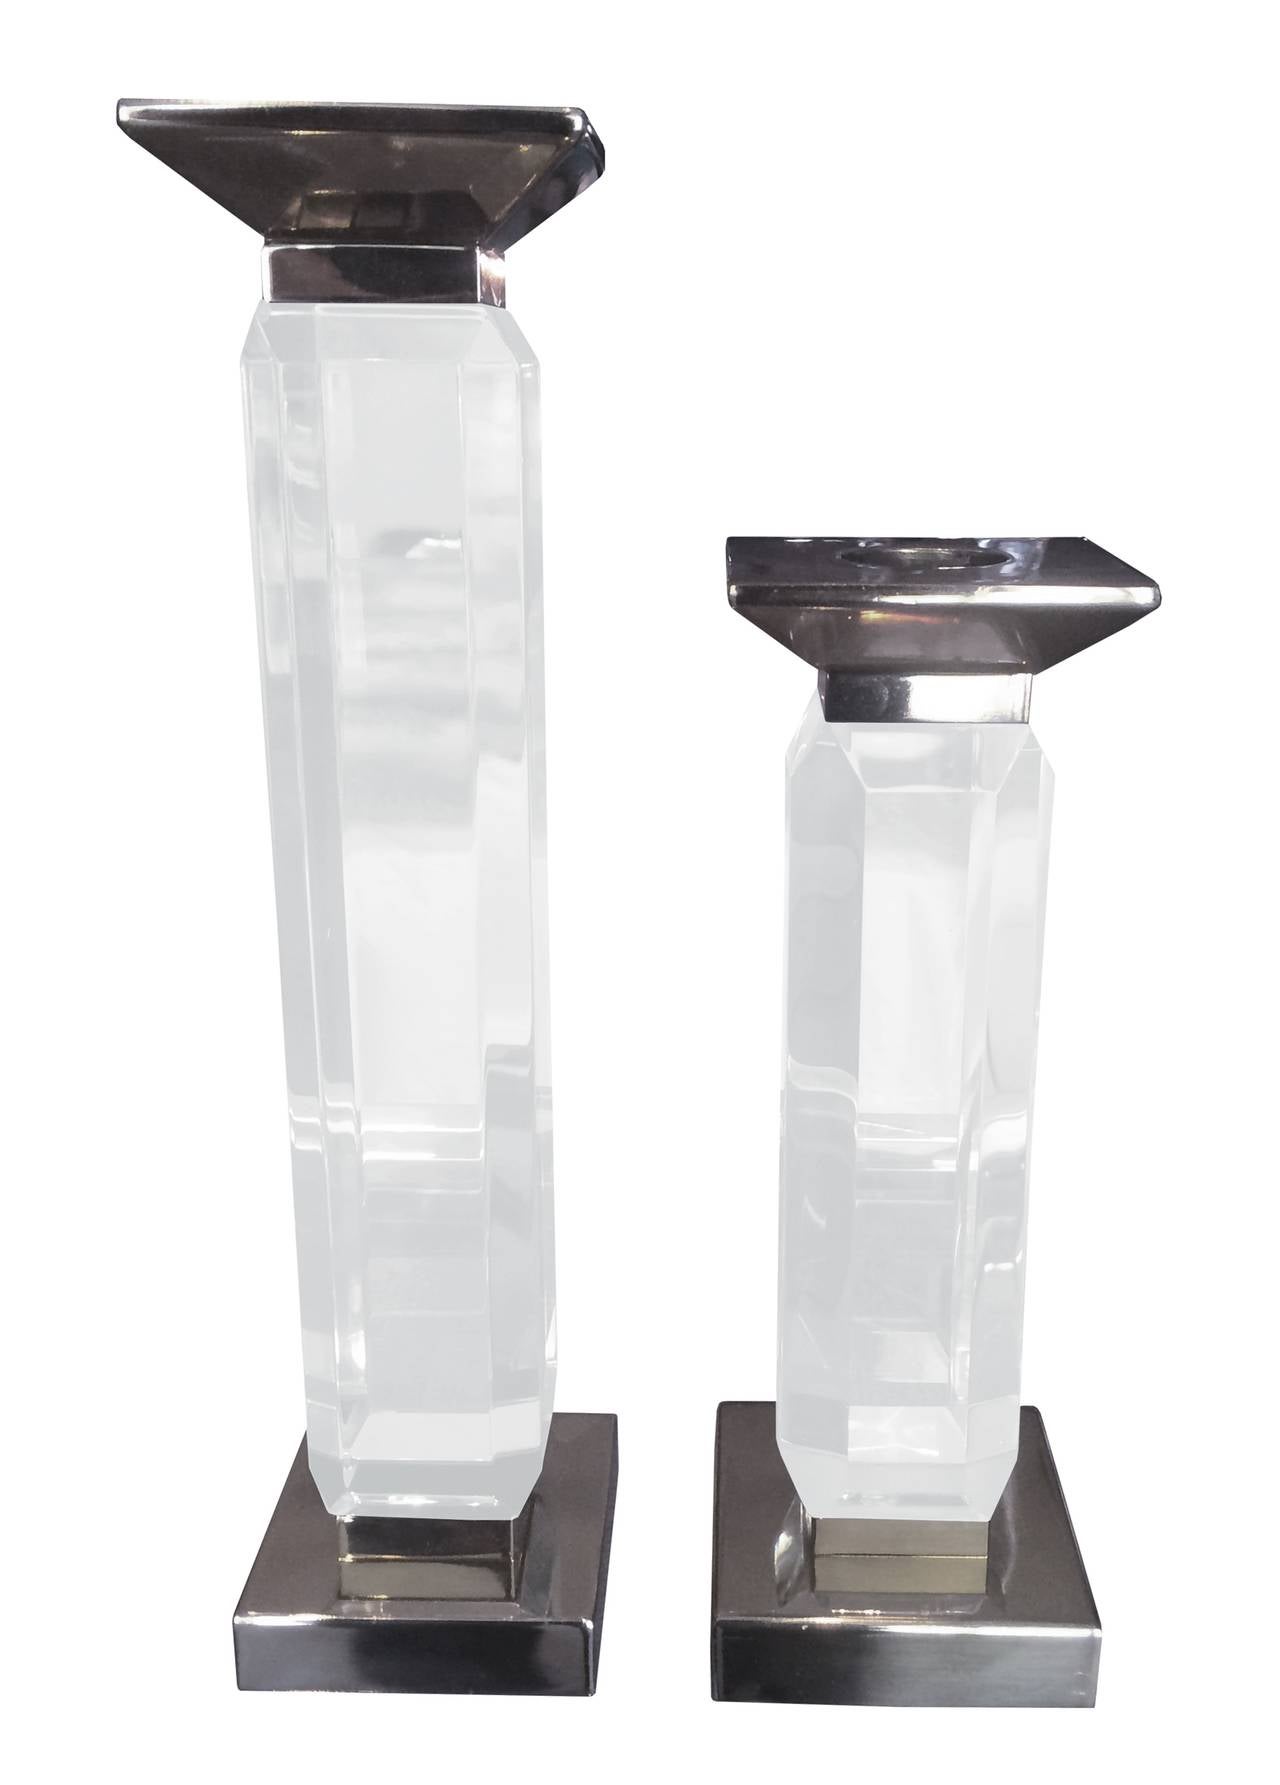 Beautiful pair of Charles Hollis Jones Lucite & Nickel candle holders designed and manufactured in the 1960's.
These candle holders are in excellent original condition, the Lucite has a beautiful bevel finish and the metal is very clean.

We have